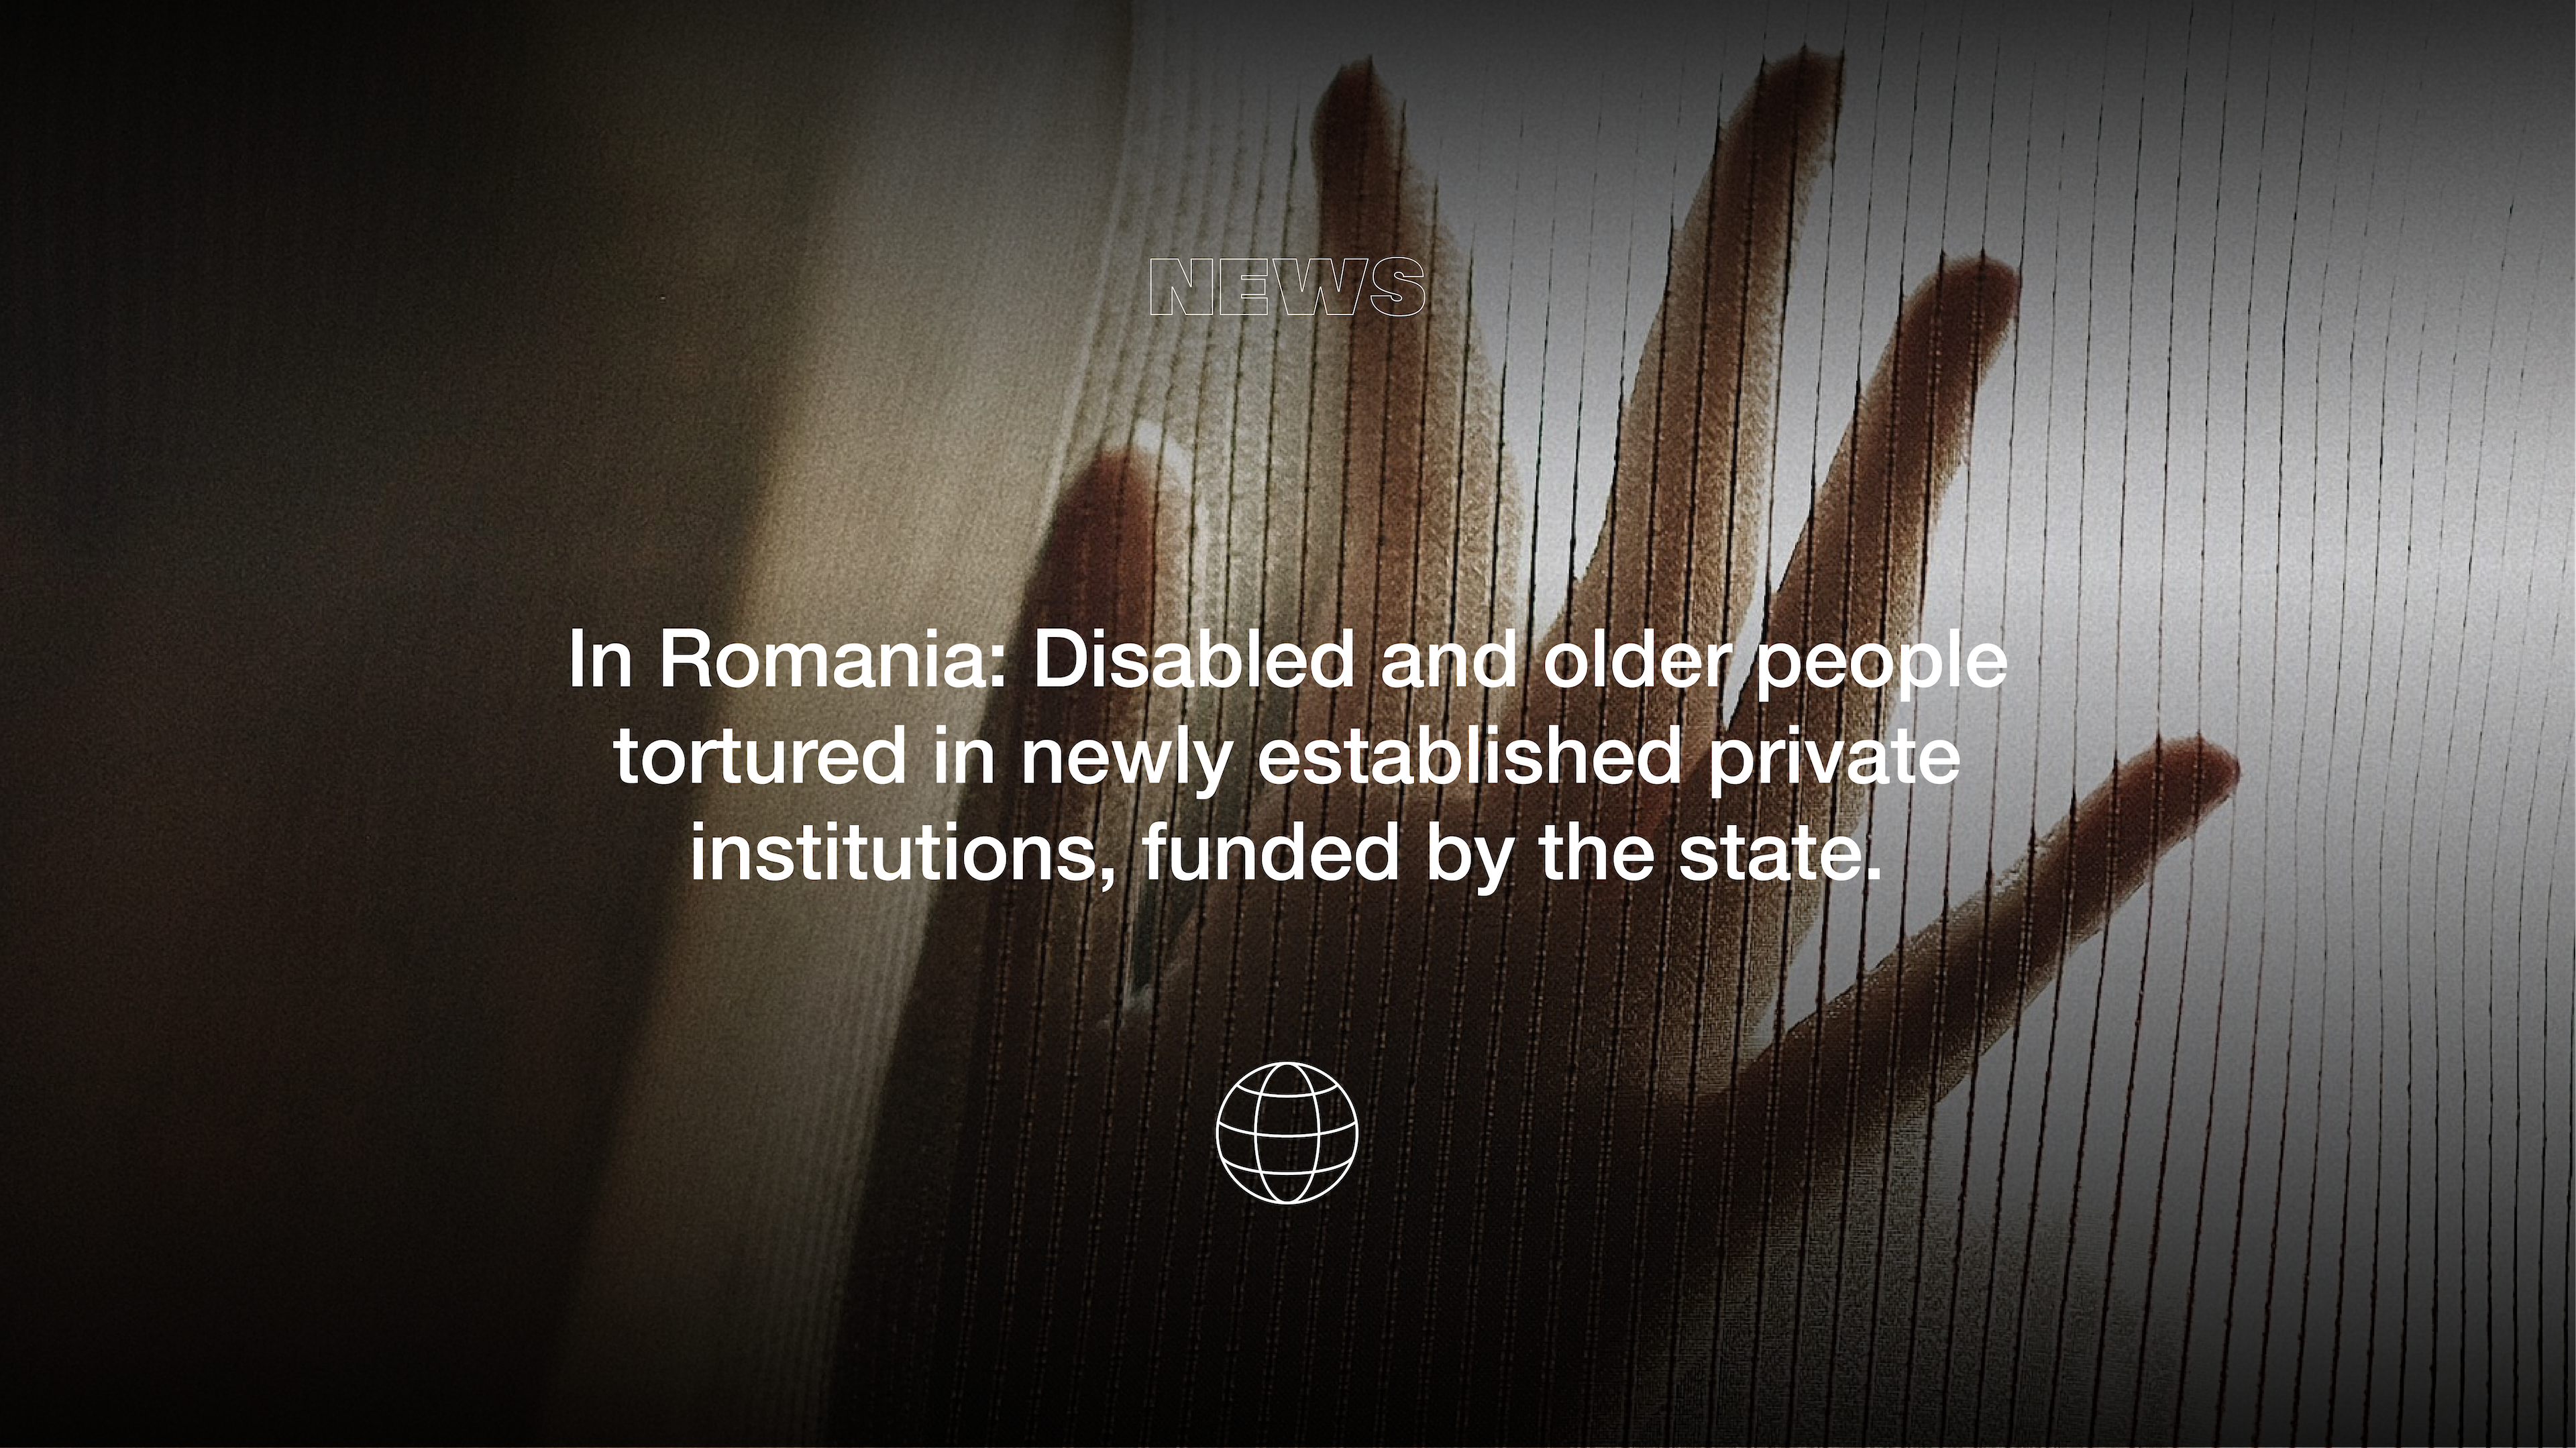 In Romania: Disabled People were found left to starve, without food or care in “Nazi camps-style” care centres. Image of an end in the shadow.